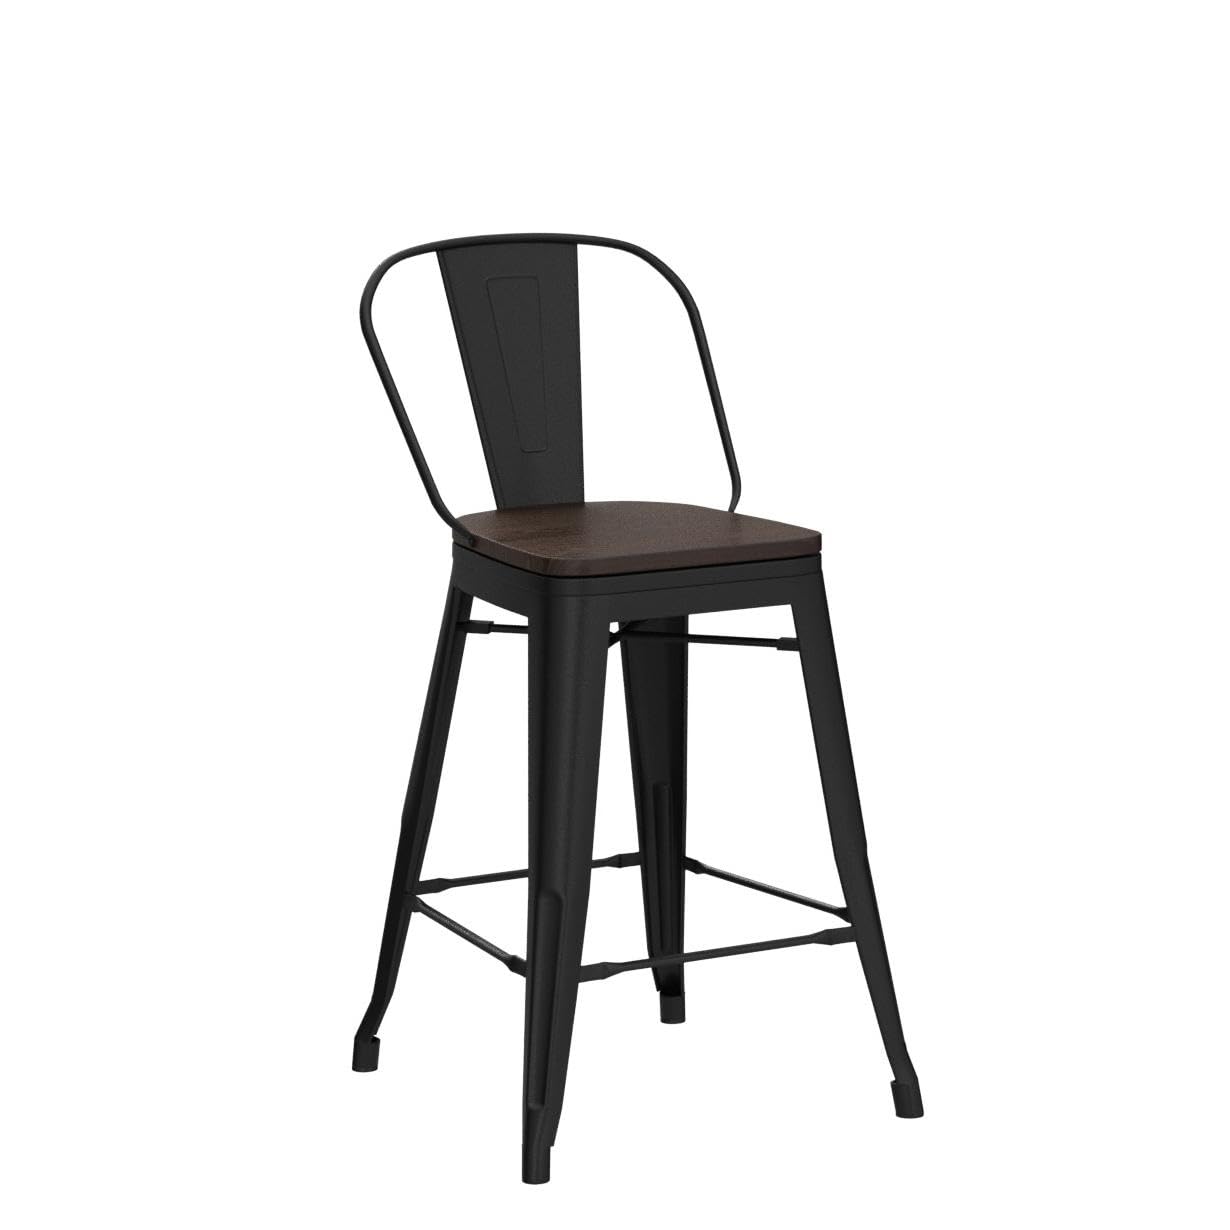 Yongqiang 26 inch Bar Stools Set of 4 High Back Metal Kitchen Counter Height Chairs Barstools with Wooden Seat Industrial Matte Black